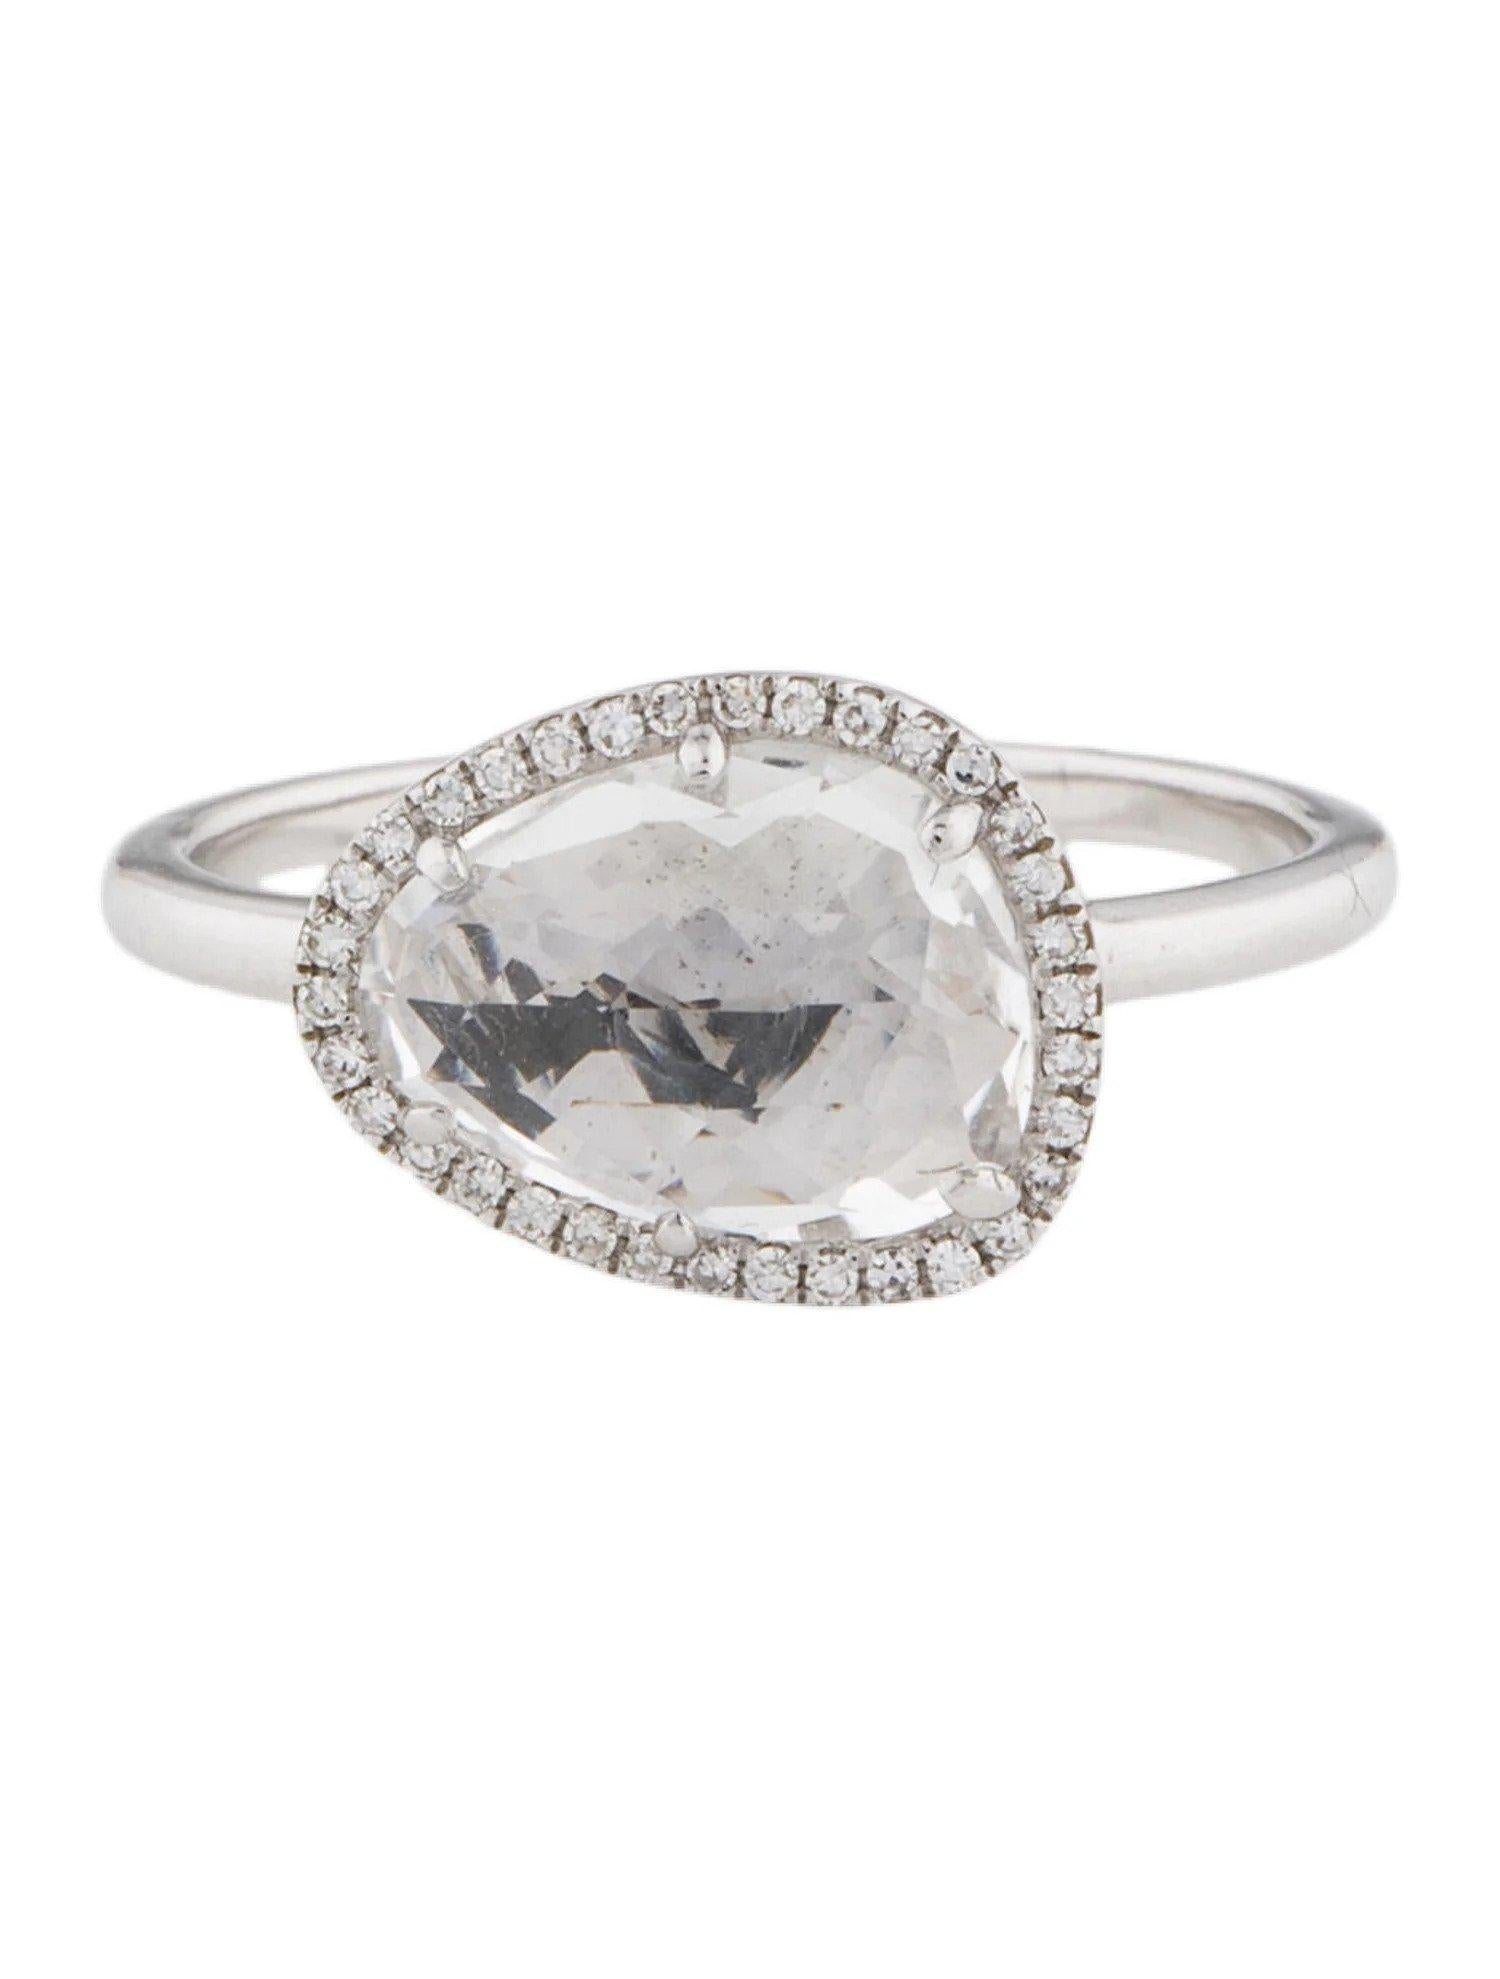 This White Topaz & Diamond Ring is a stunning and timeless accessory that can add a touch of glamour and sophistication to any outfit. 

This ring features a 2.69 Carat White Topaz (12 x 9 MM), with a Diamond Halo comprised of 0.08 Carats of Single